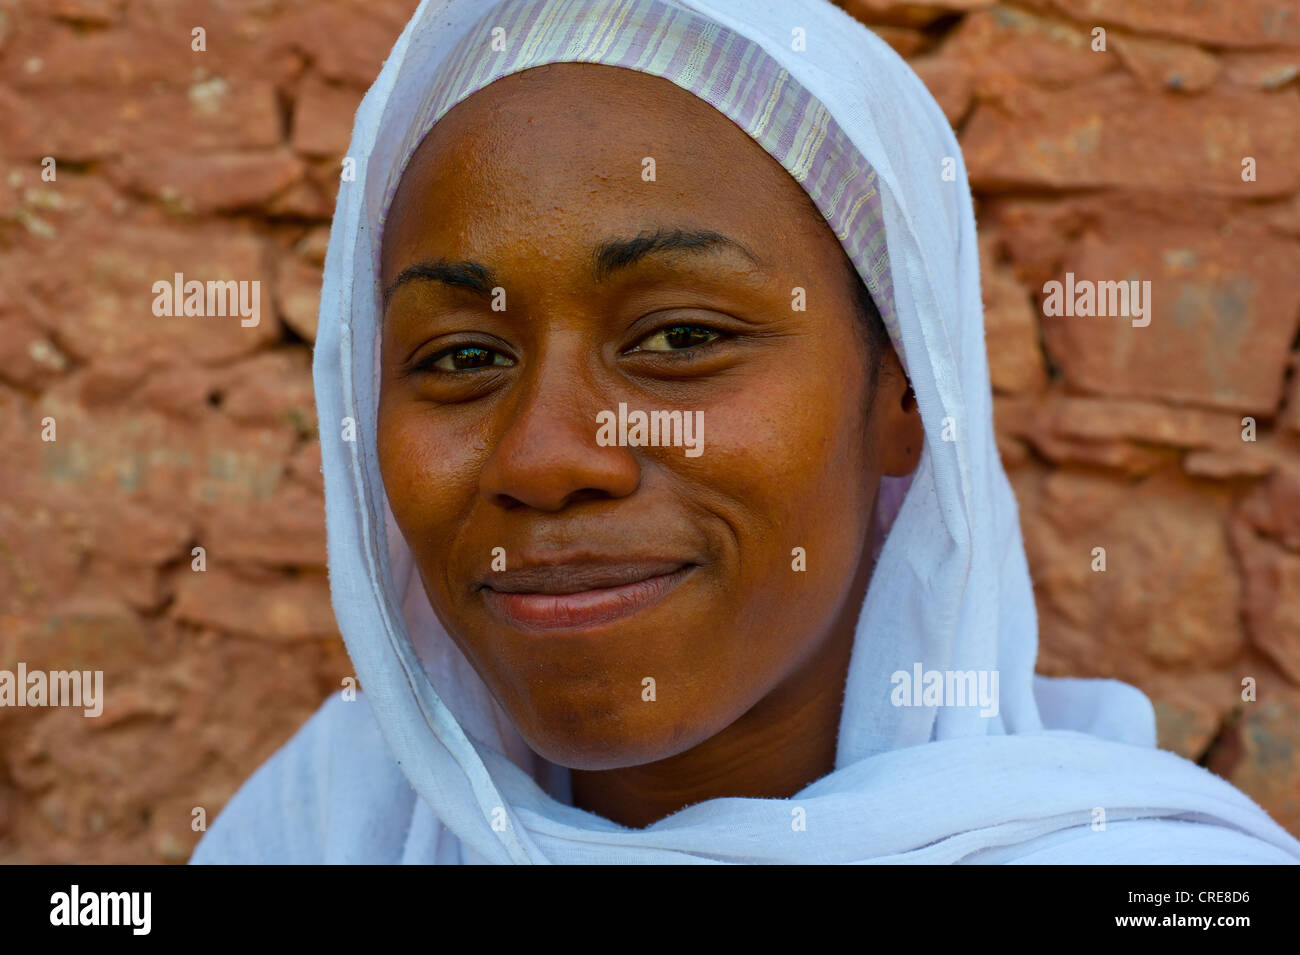 Portrait of a smiling, dark-skinned, young woman wearing a white headscarf, southern Morocco, Morocco, Africa Stock Photo